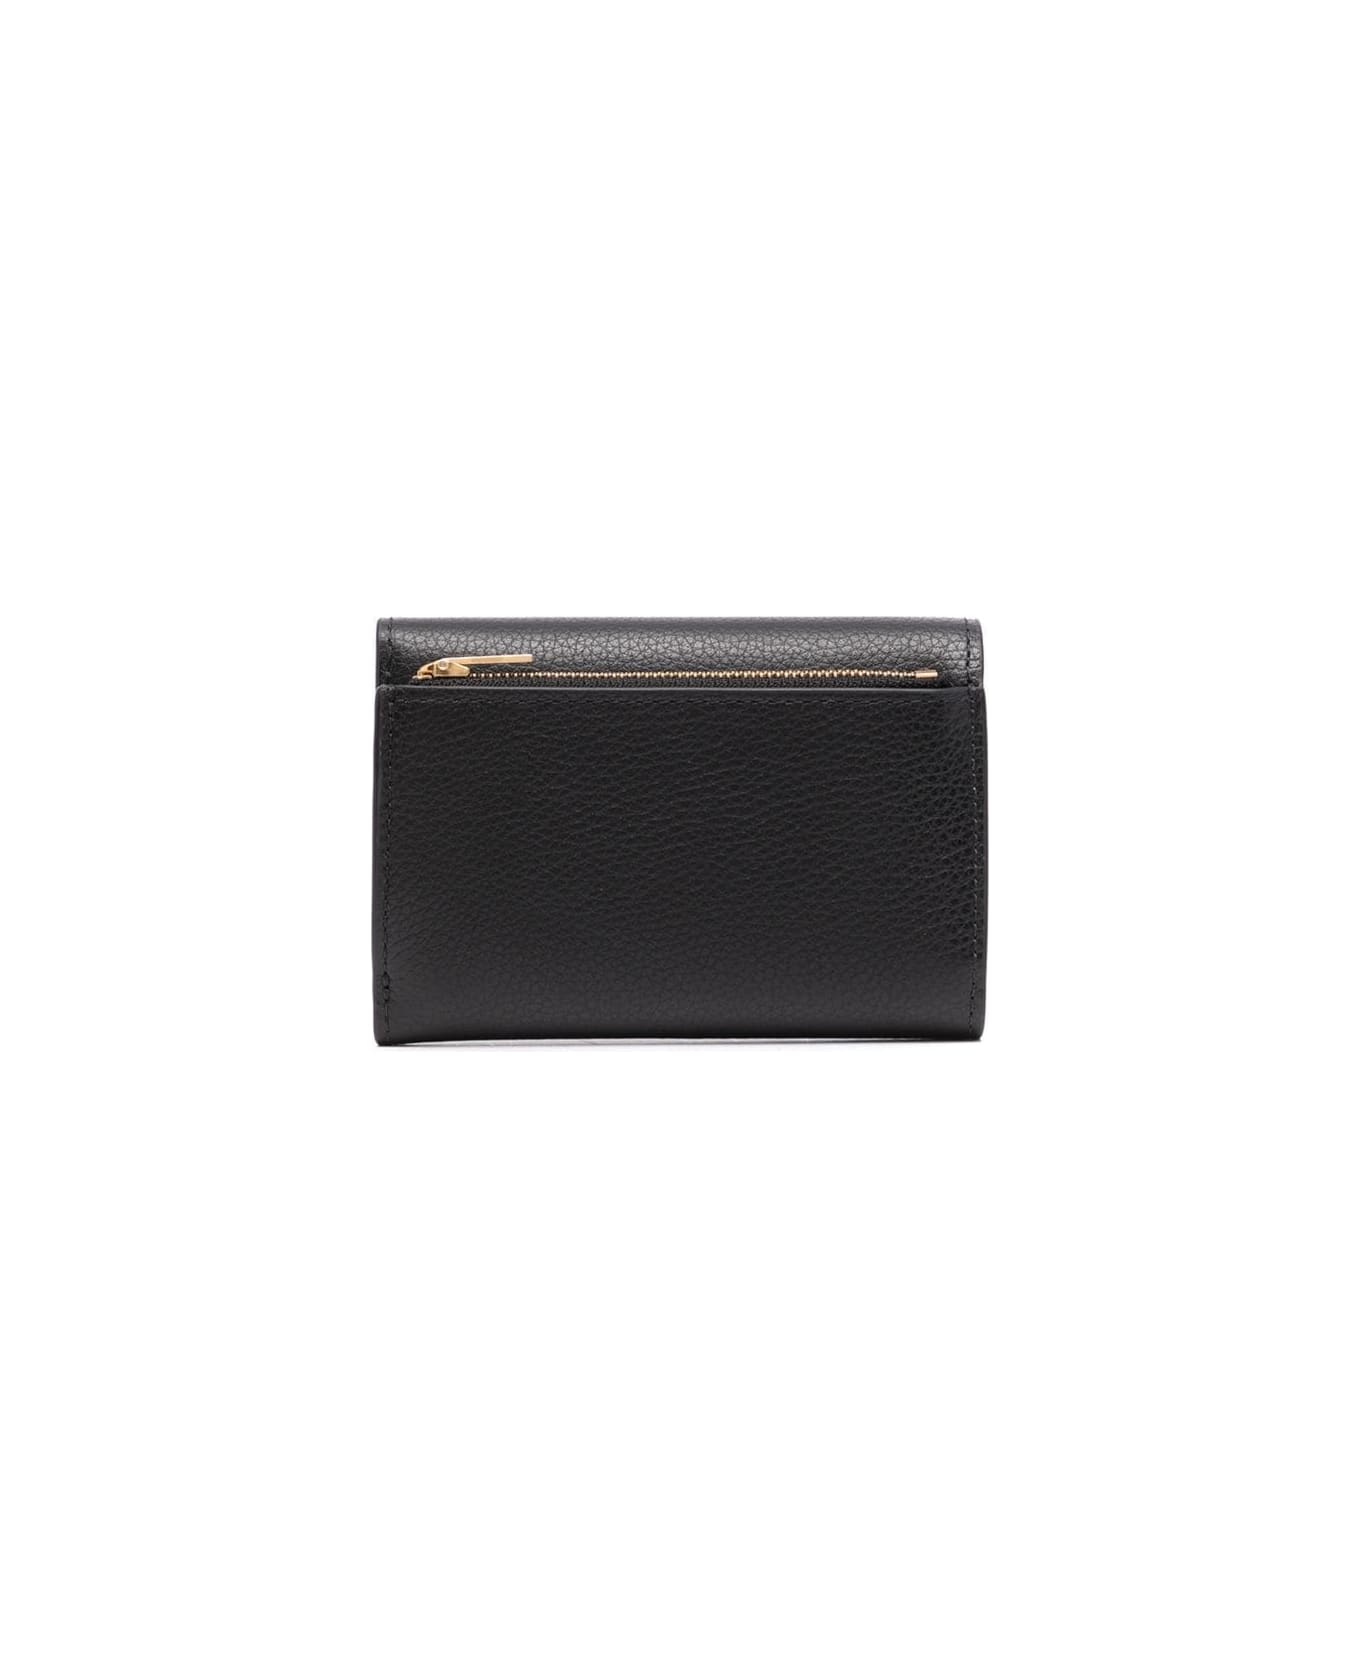 Mulberry Black Wallet With Logo And Button Fastening In Grained Leather Woman - BLACK